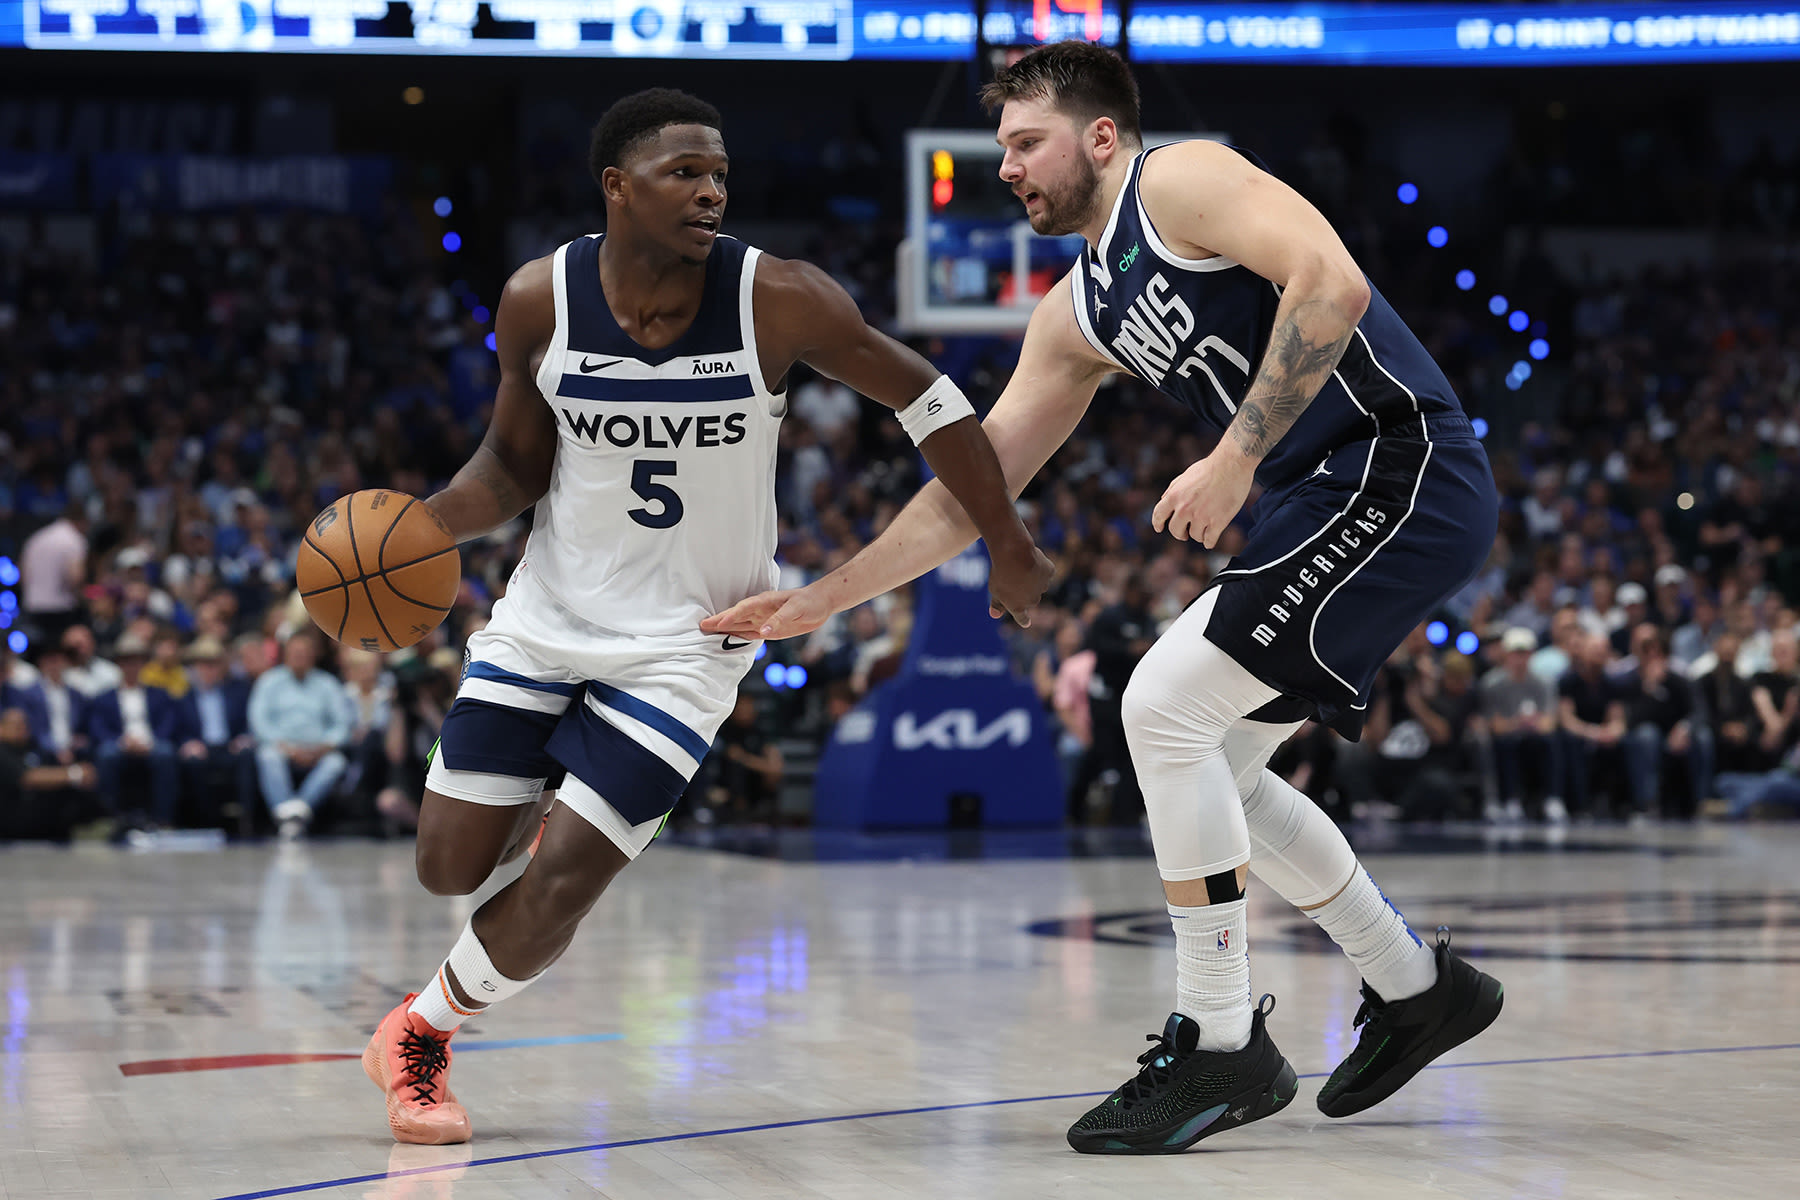 How to Watch Timberwolves vs. Mavericks Conference Finals Games Without Cable